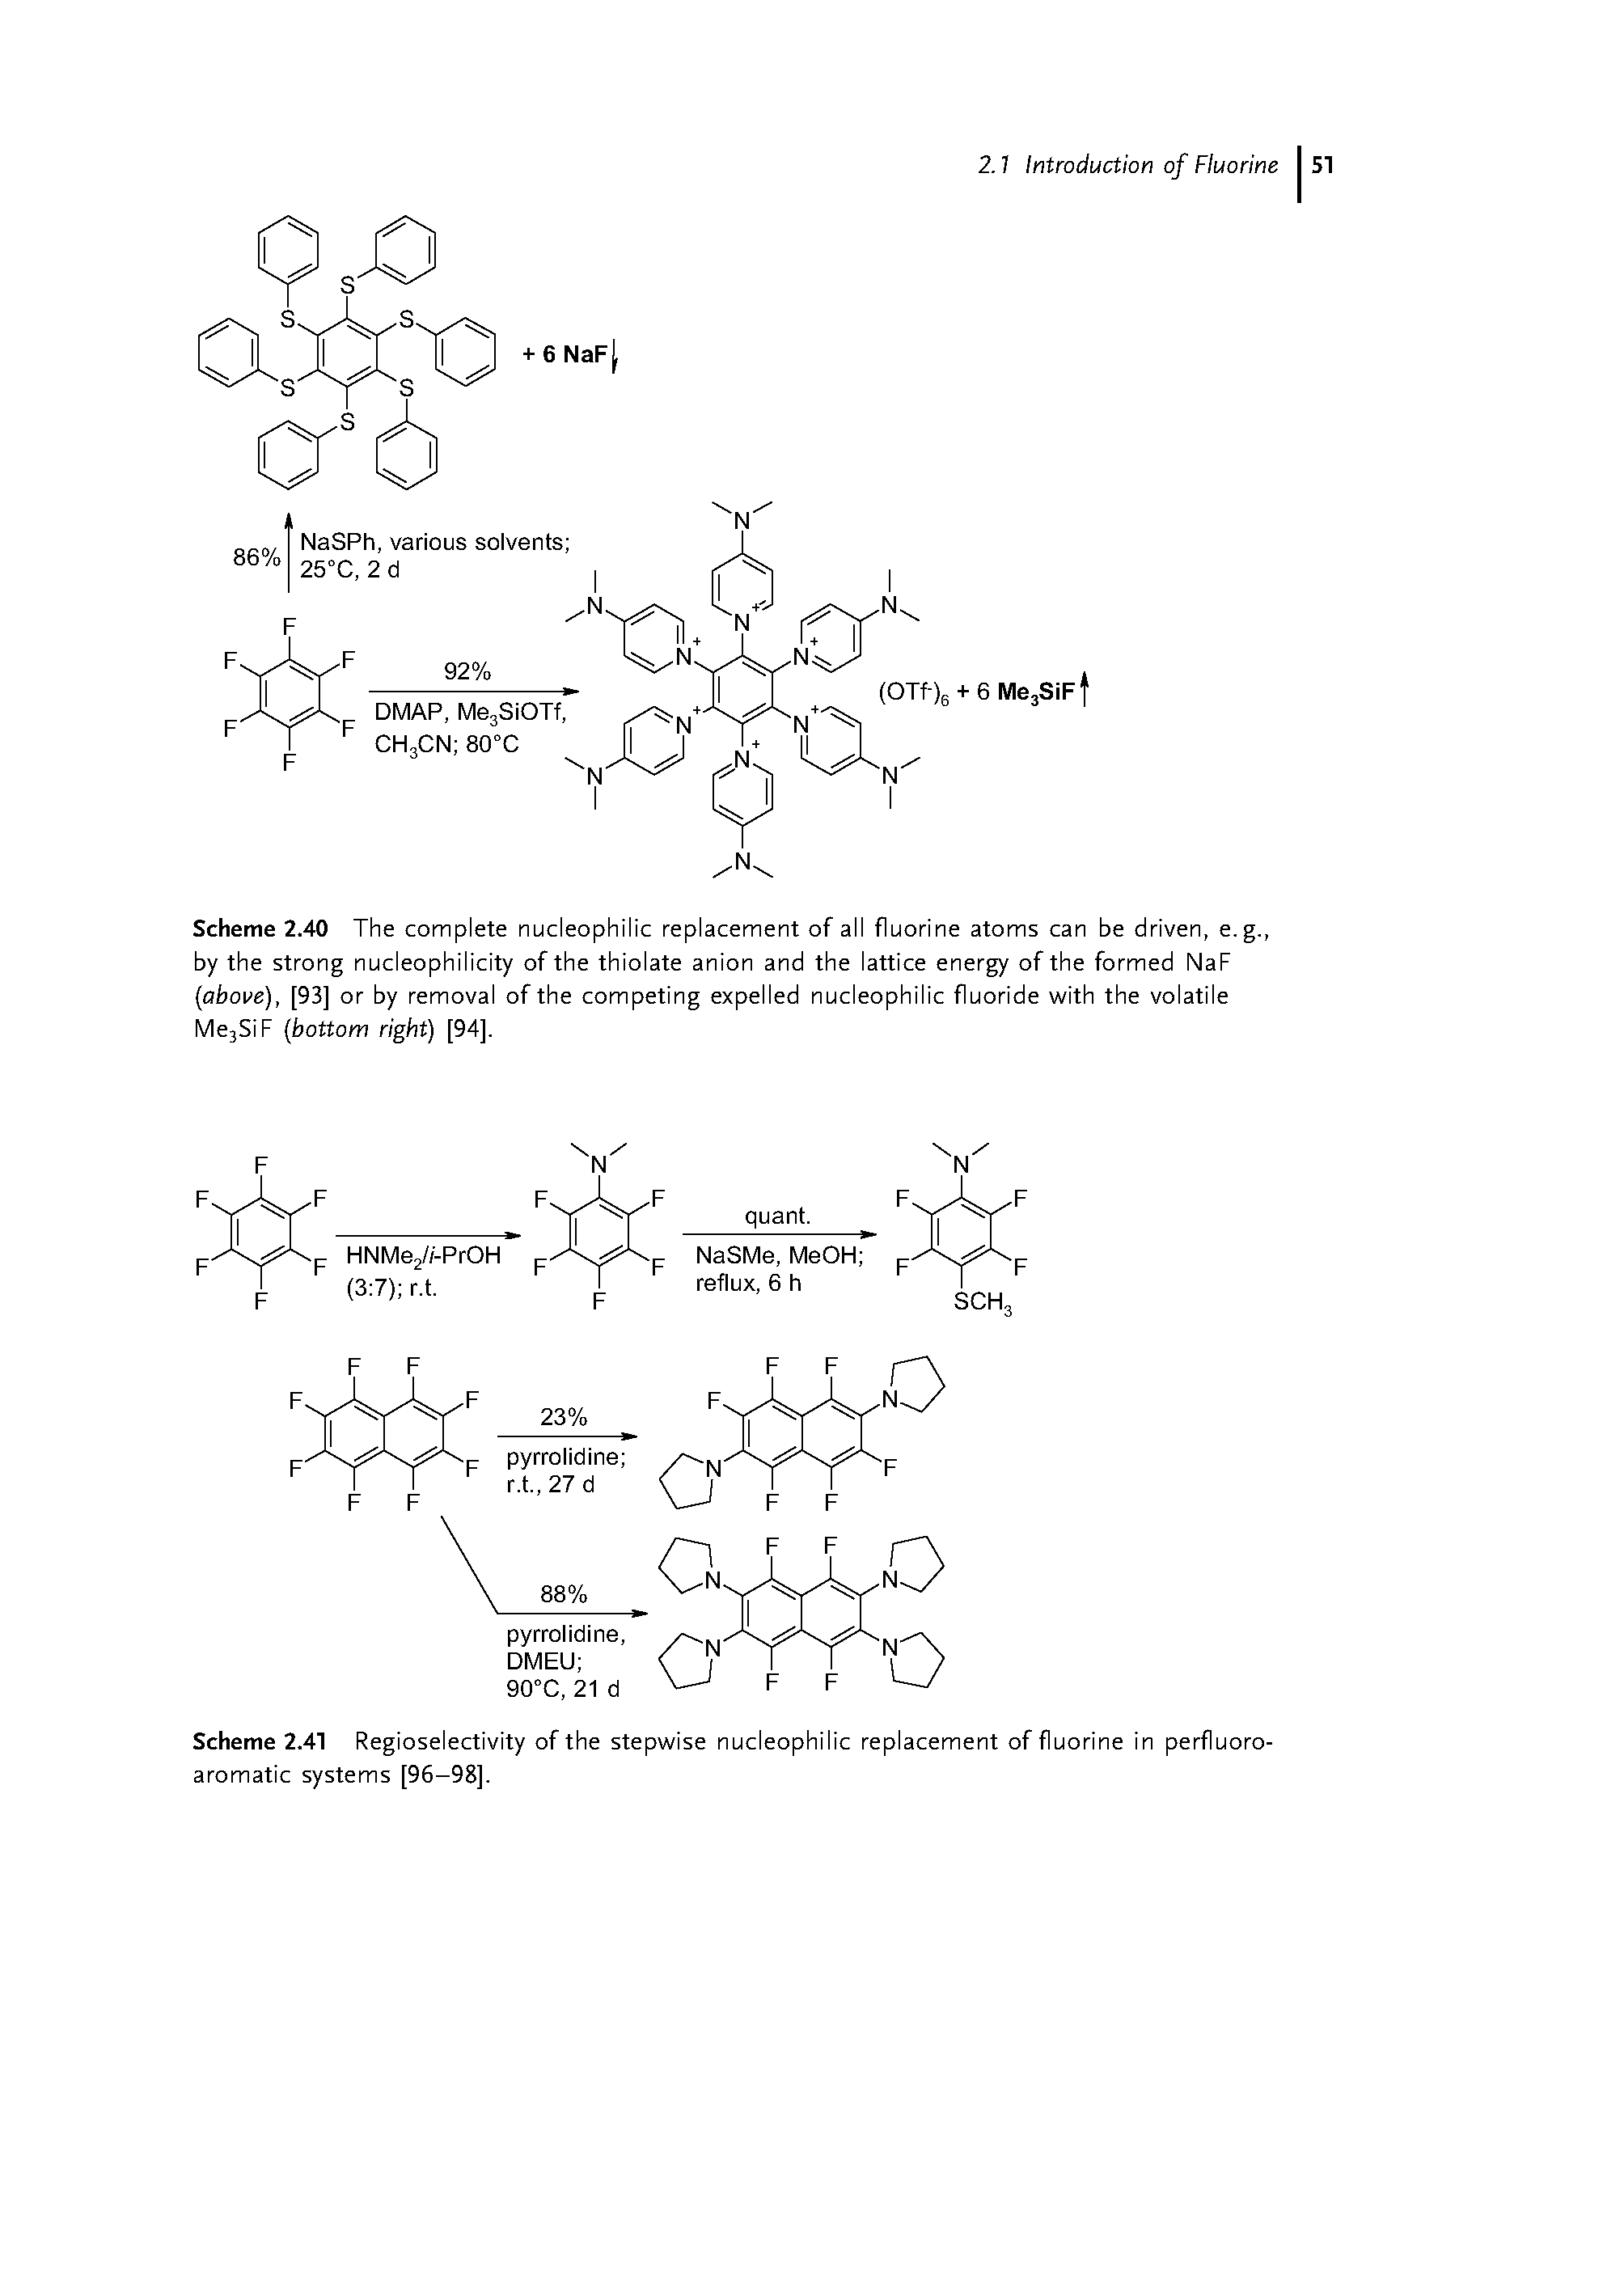 Scheme 2.40 The complete nucleophilic replacement of all fluorine atoms can be driven, e.g., by the strong nucleophilicity of the thiolate anion and the lattice energy of the formed NaF aboue), [93] or by removal of the competing expelled nucleophilic fluoride with the volatile l /le3SiF bottom right) [94].